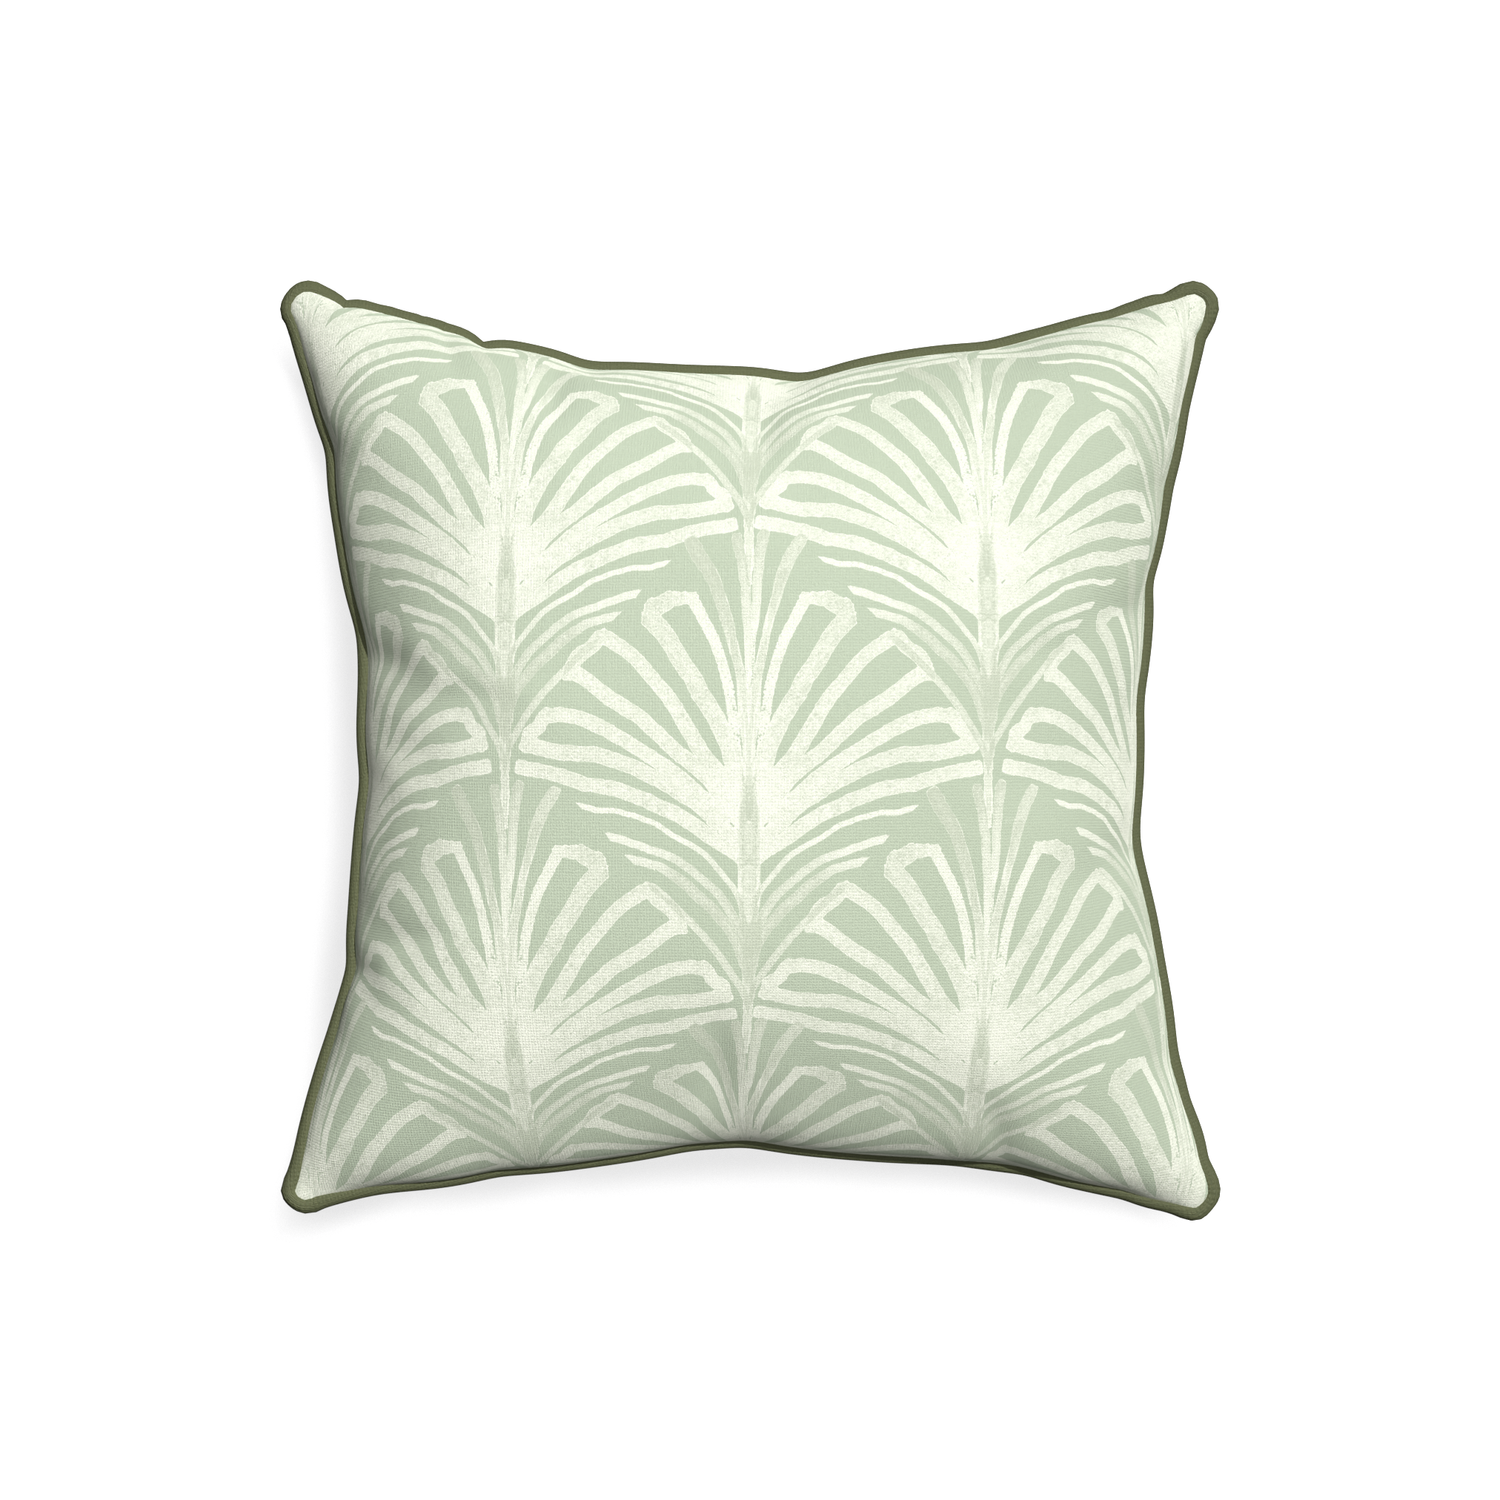 20-square suzy sage custom pillow with f piping on white background